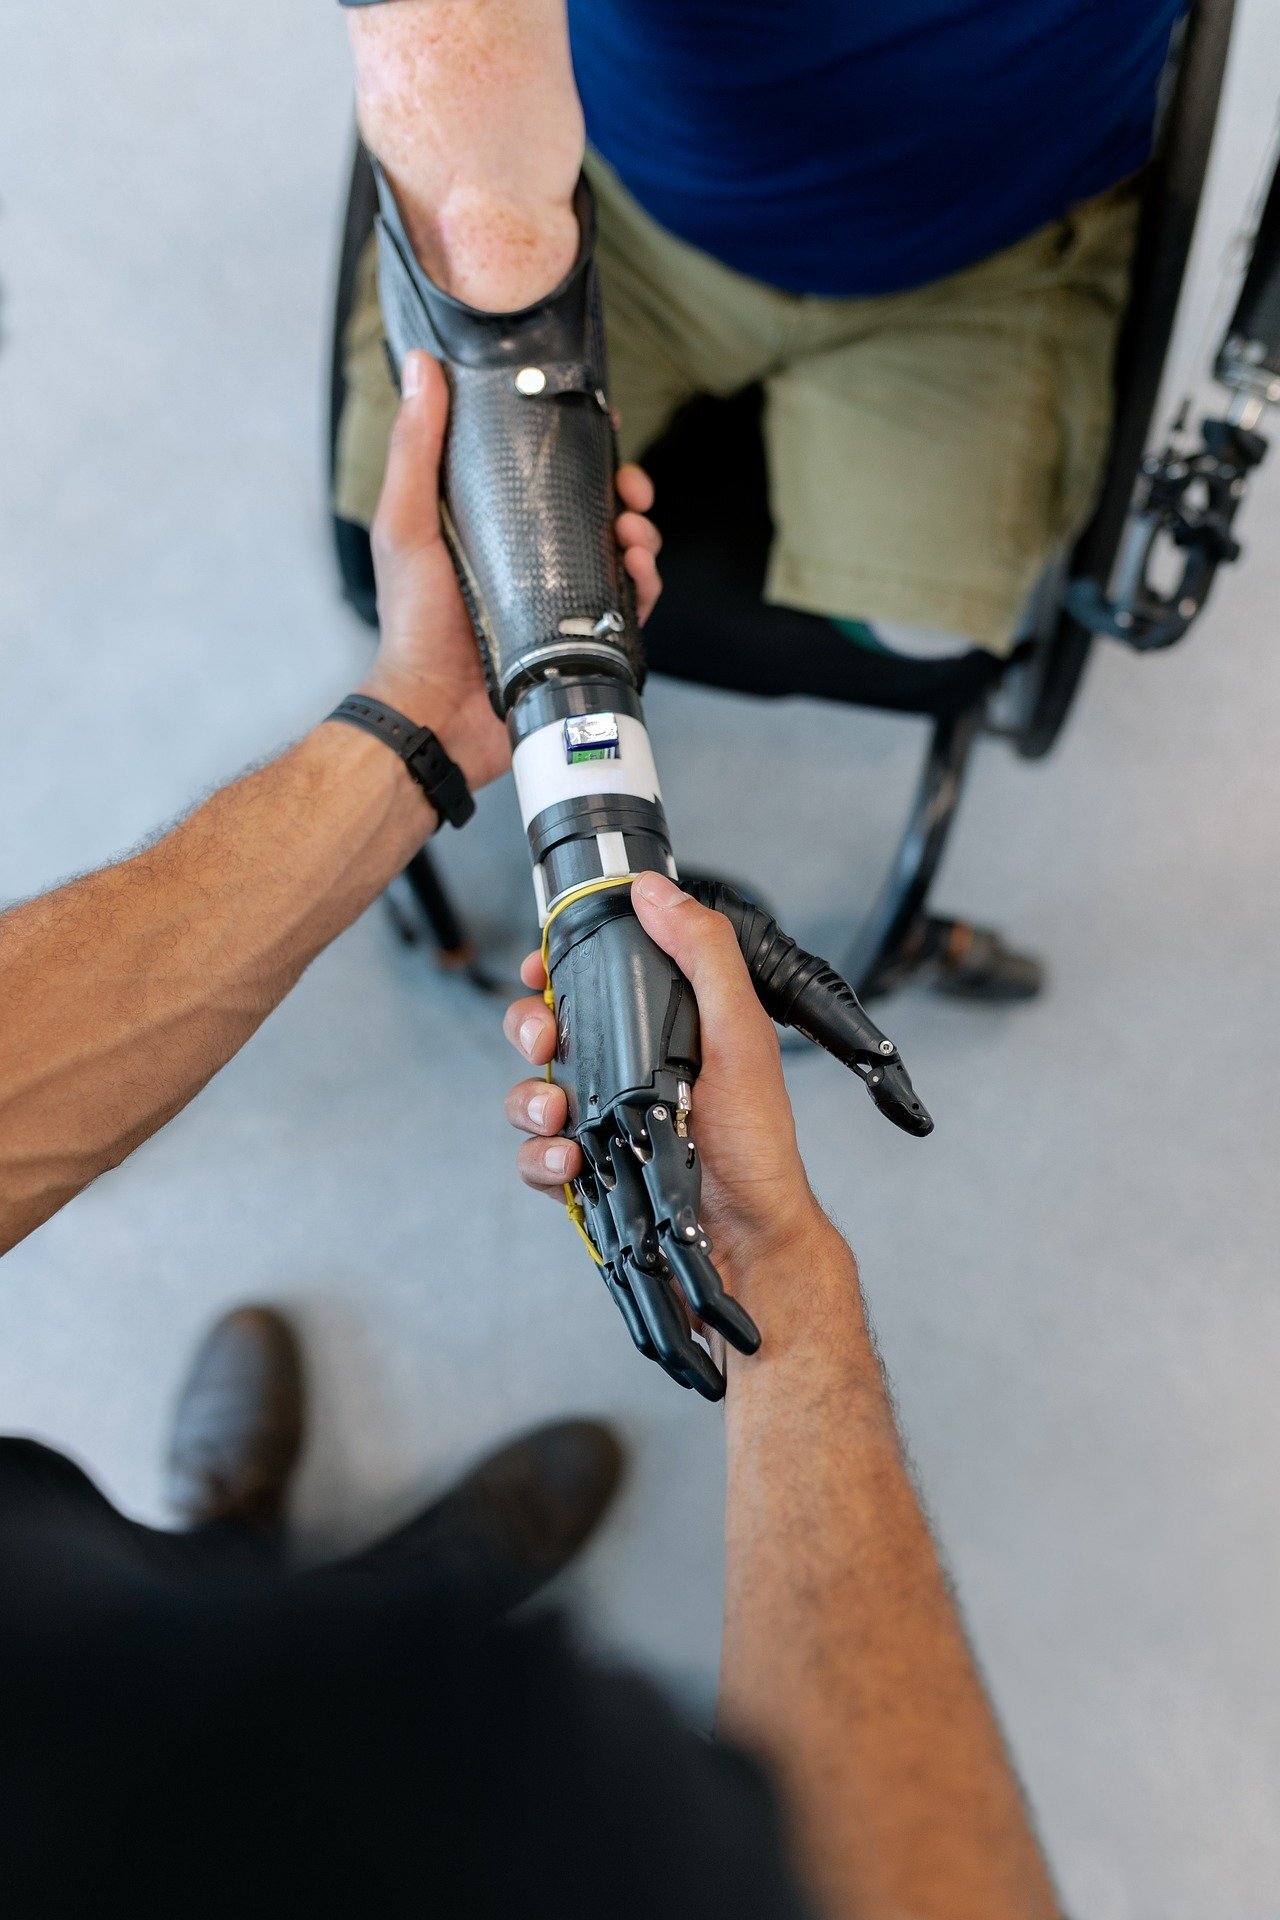 A to robotic arms based on augmented reality and interface